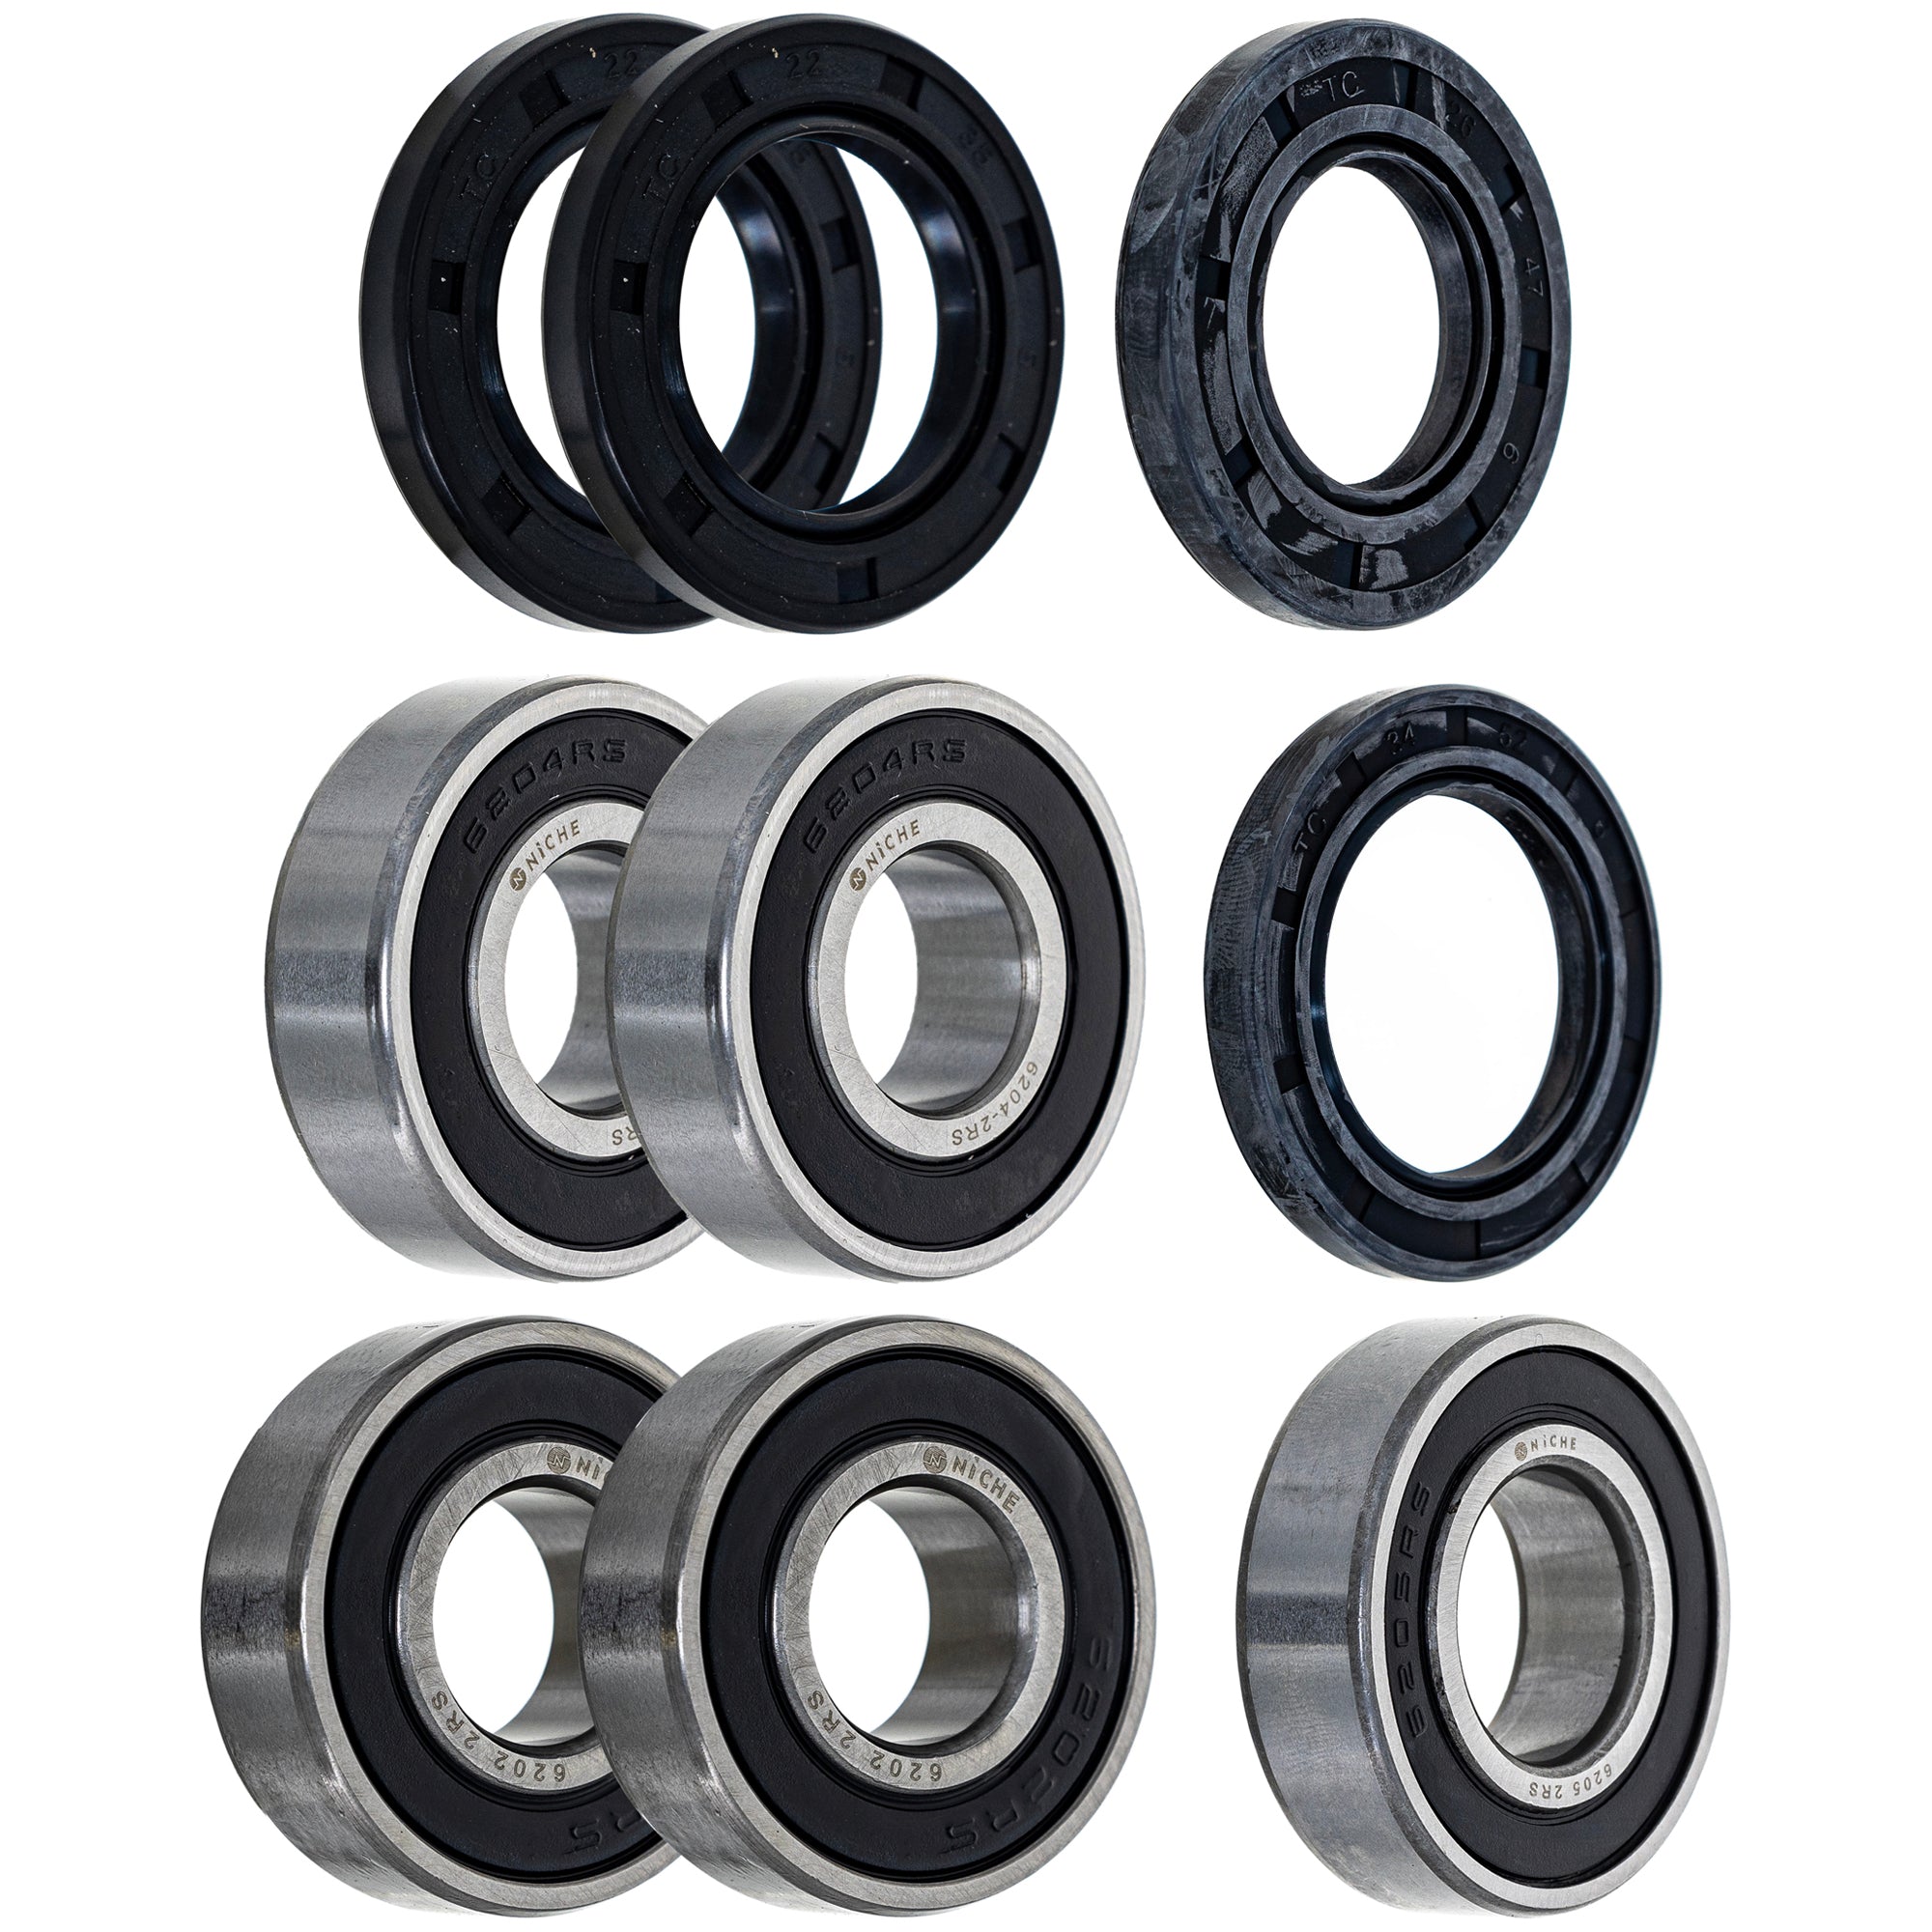 Wheel Bearing Seal Kit for zOTHER Ref No DR250SE NICHE MK1008687